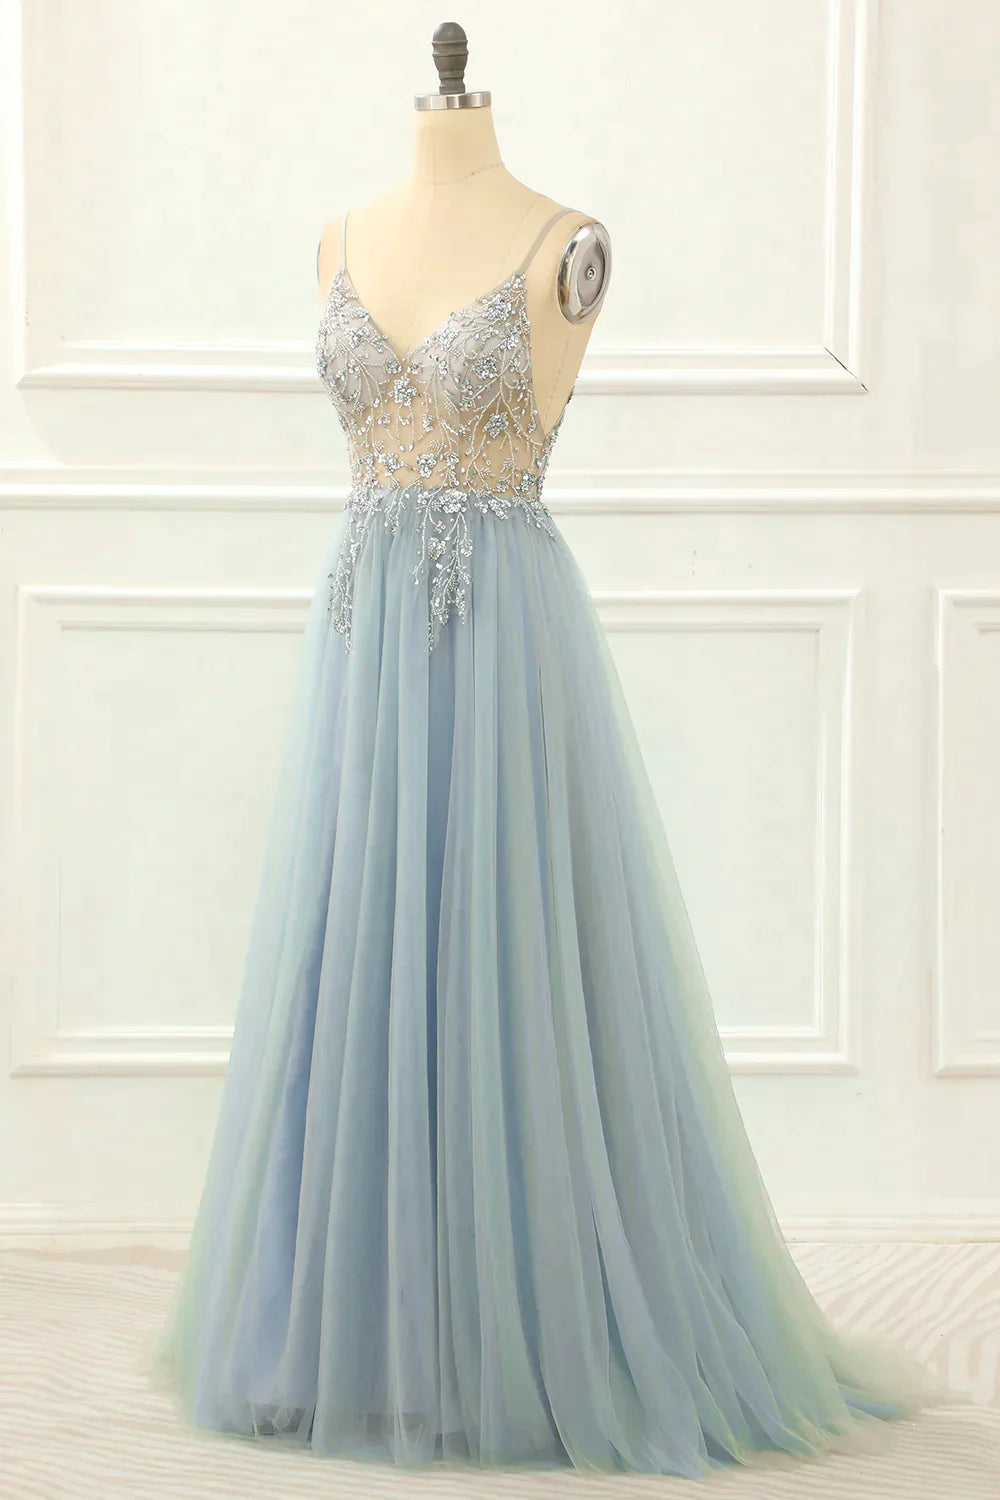 Gorgeous Tulle A-line Spaghetti Straps Long Corset Prom Dress with Beading outfit, Evening Dress For Weddings